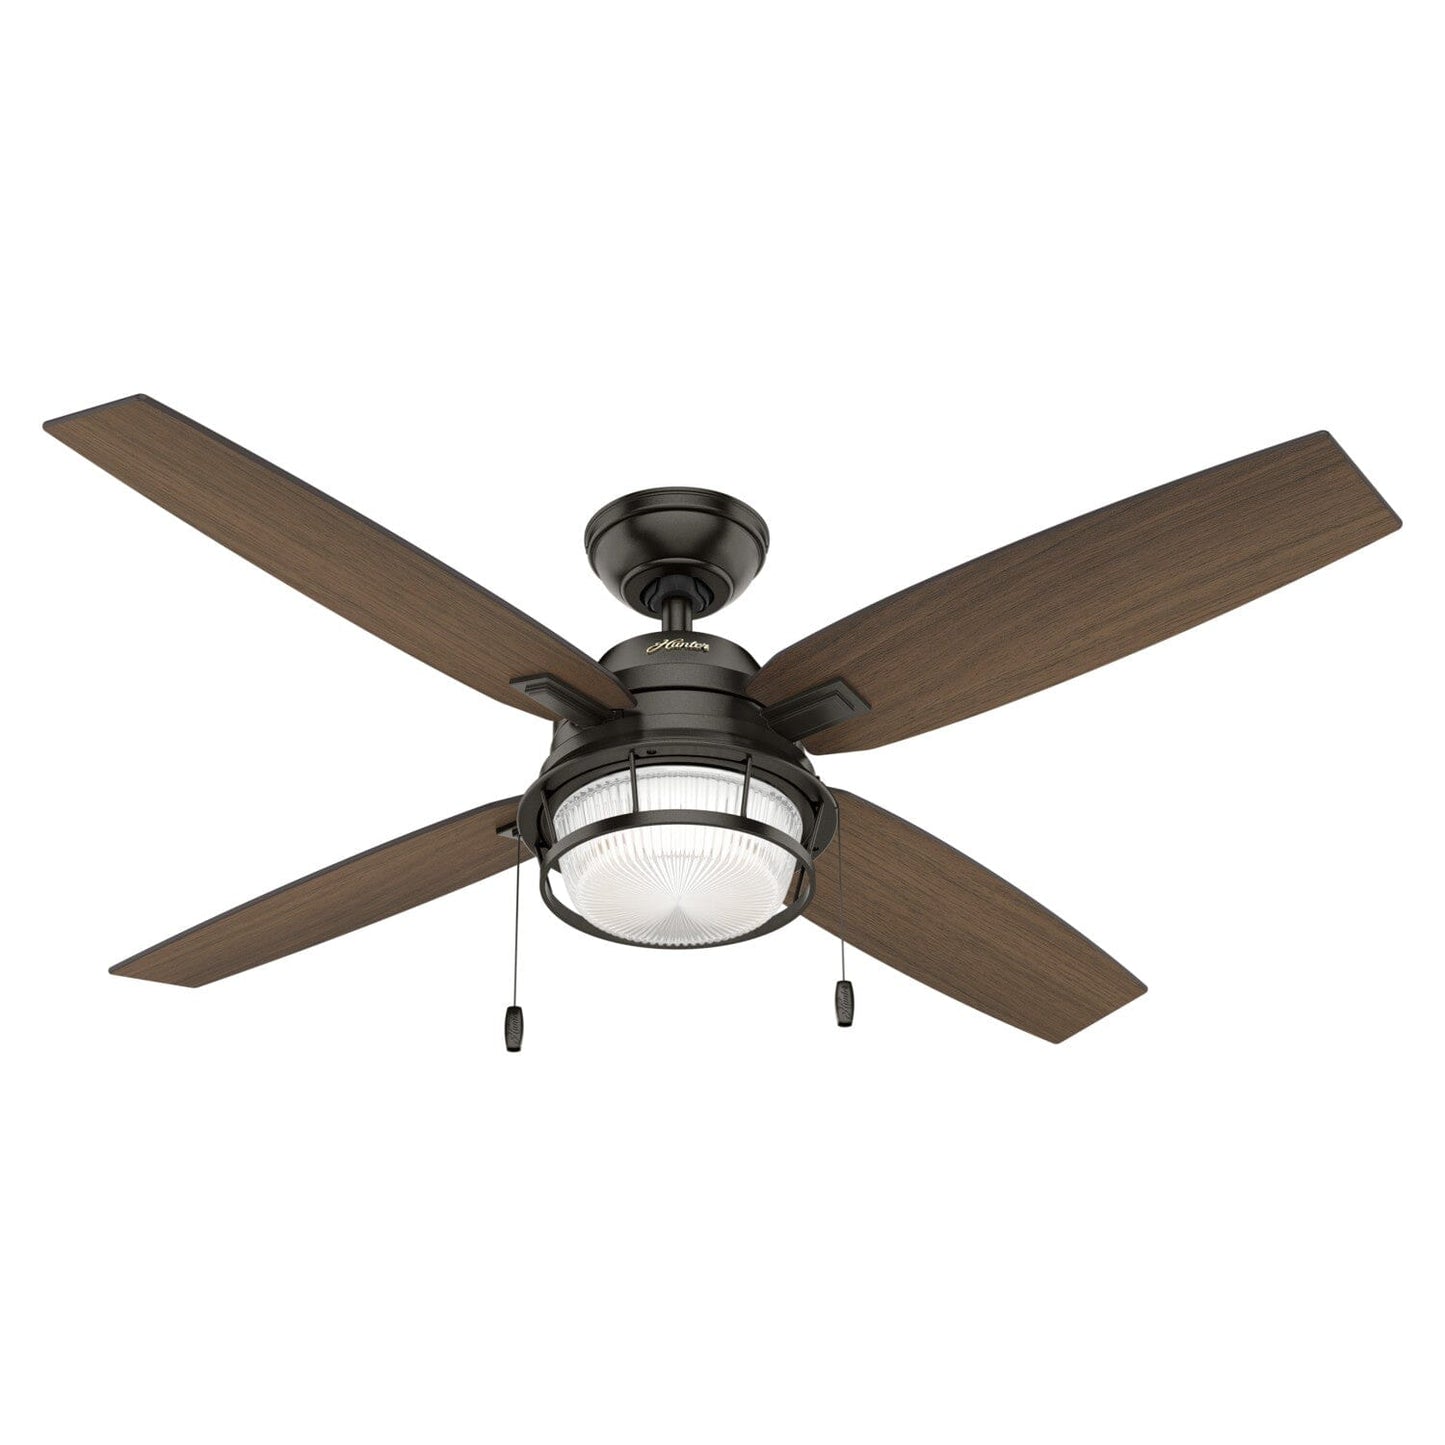 Ocala Outdoor with LED Light 52 inch Ceiling Fans Hunter Noble Bronze - Roasted Maple 